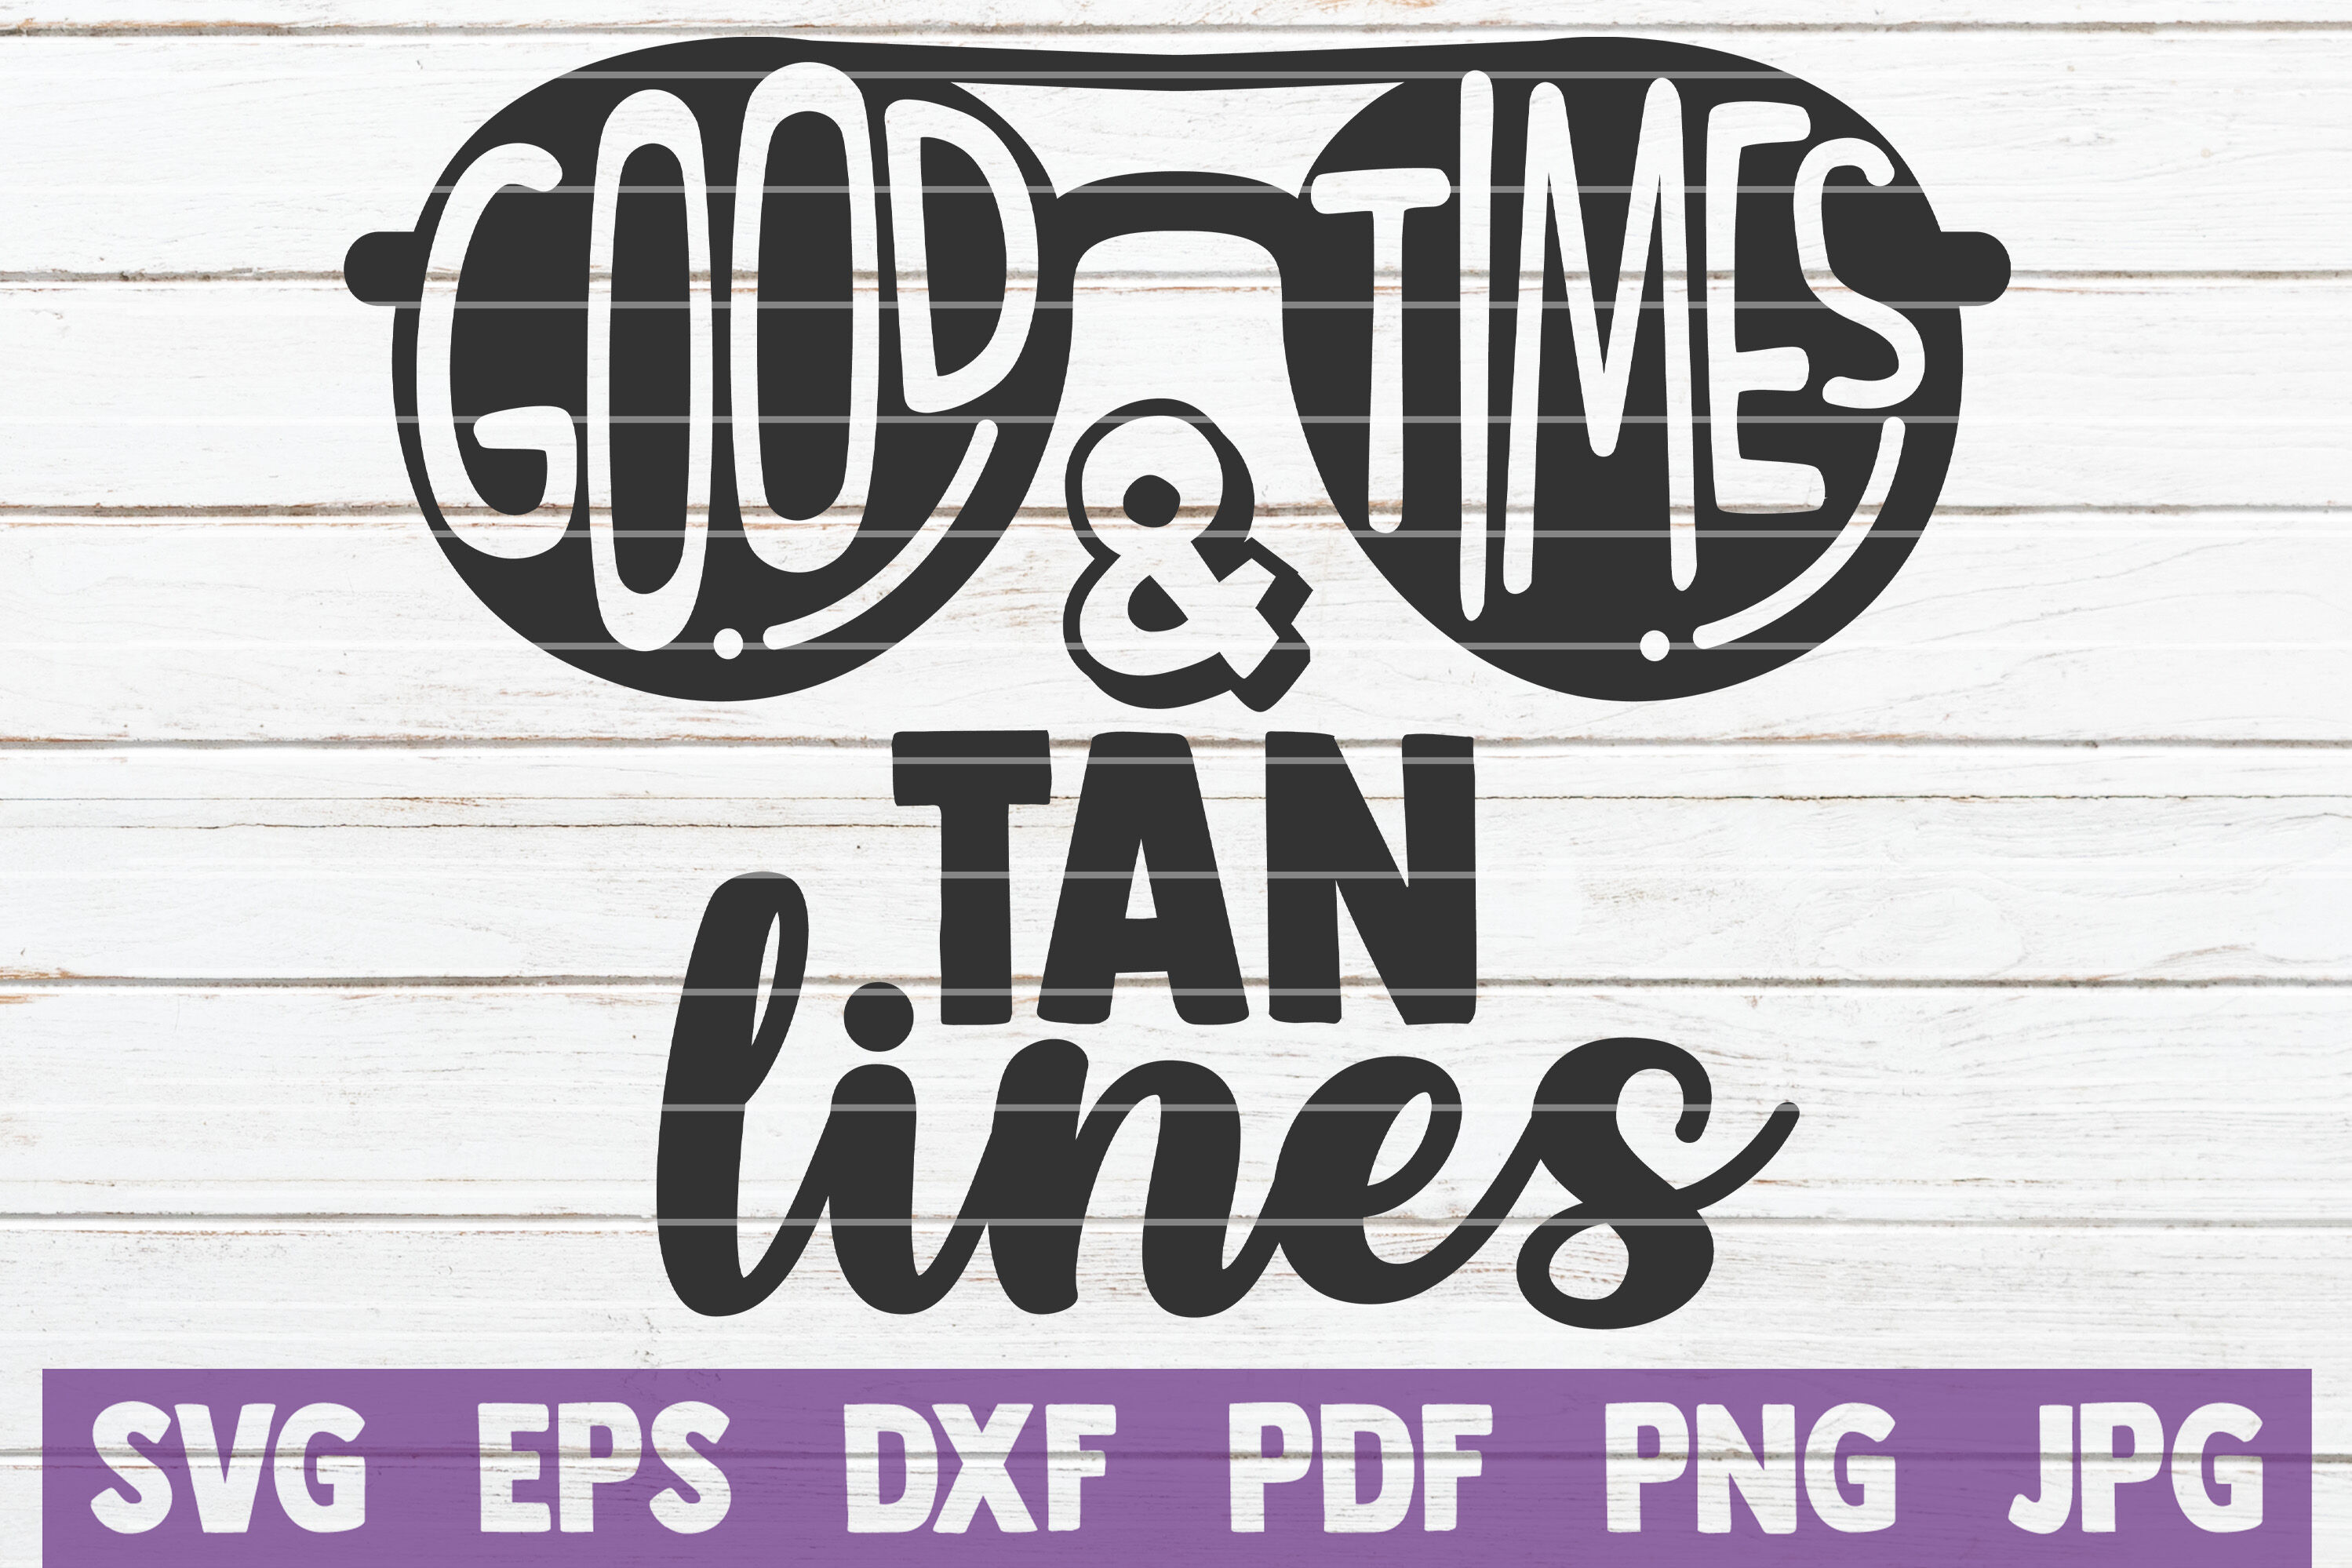 Download Summer SVG Bundle | SVG Cut Files By MintyMarshmallows ...